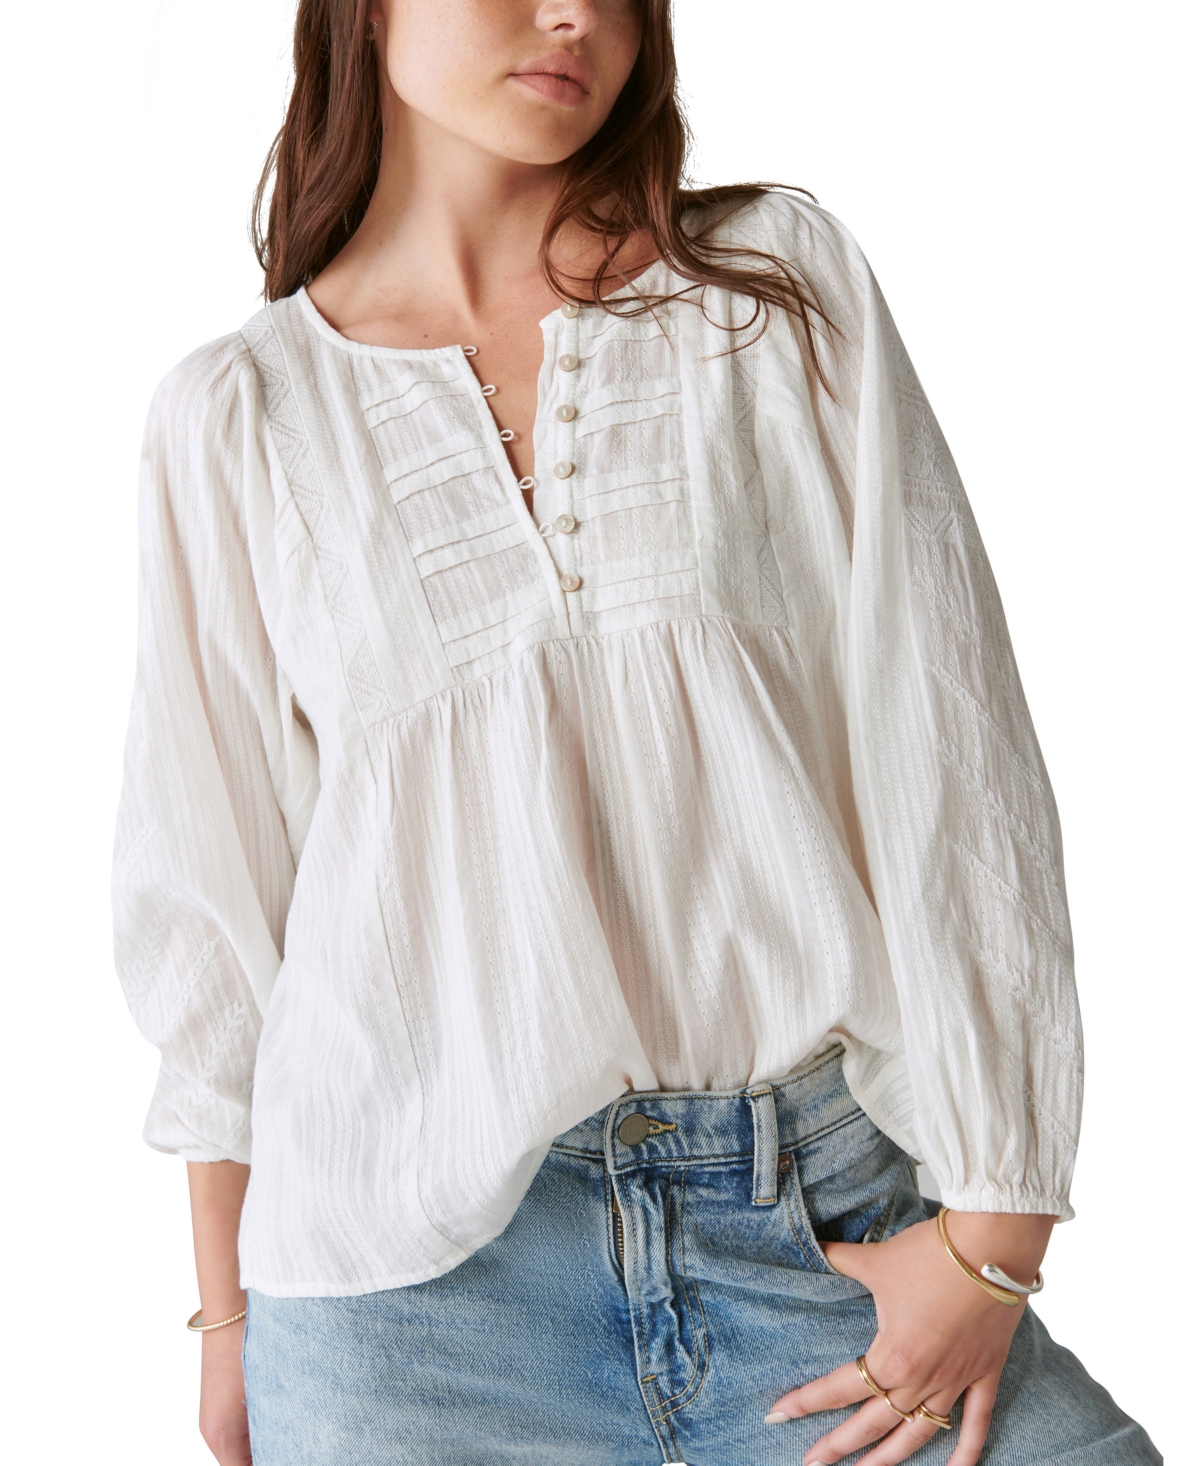 LUCKY BRAND WOMEN'S LONG SLEEVE EMBROIDERED TUNIC TOP